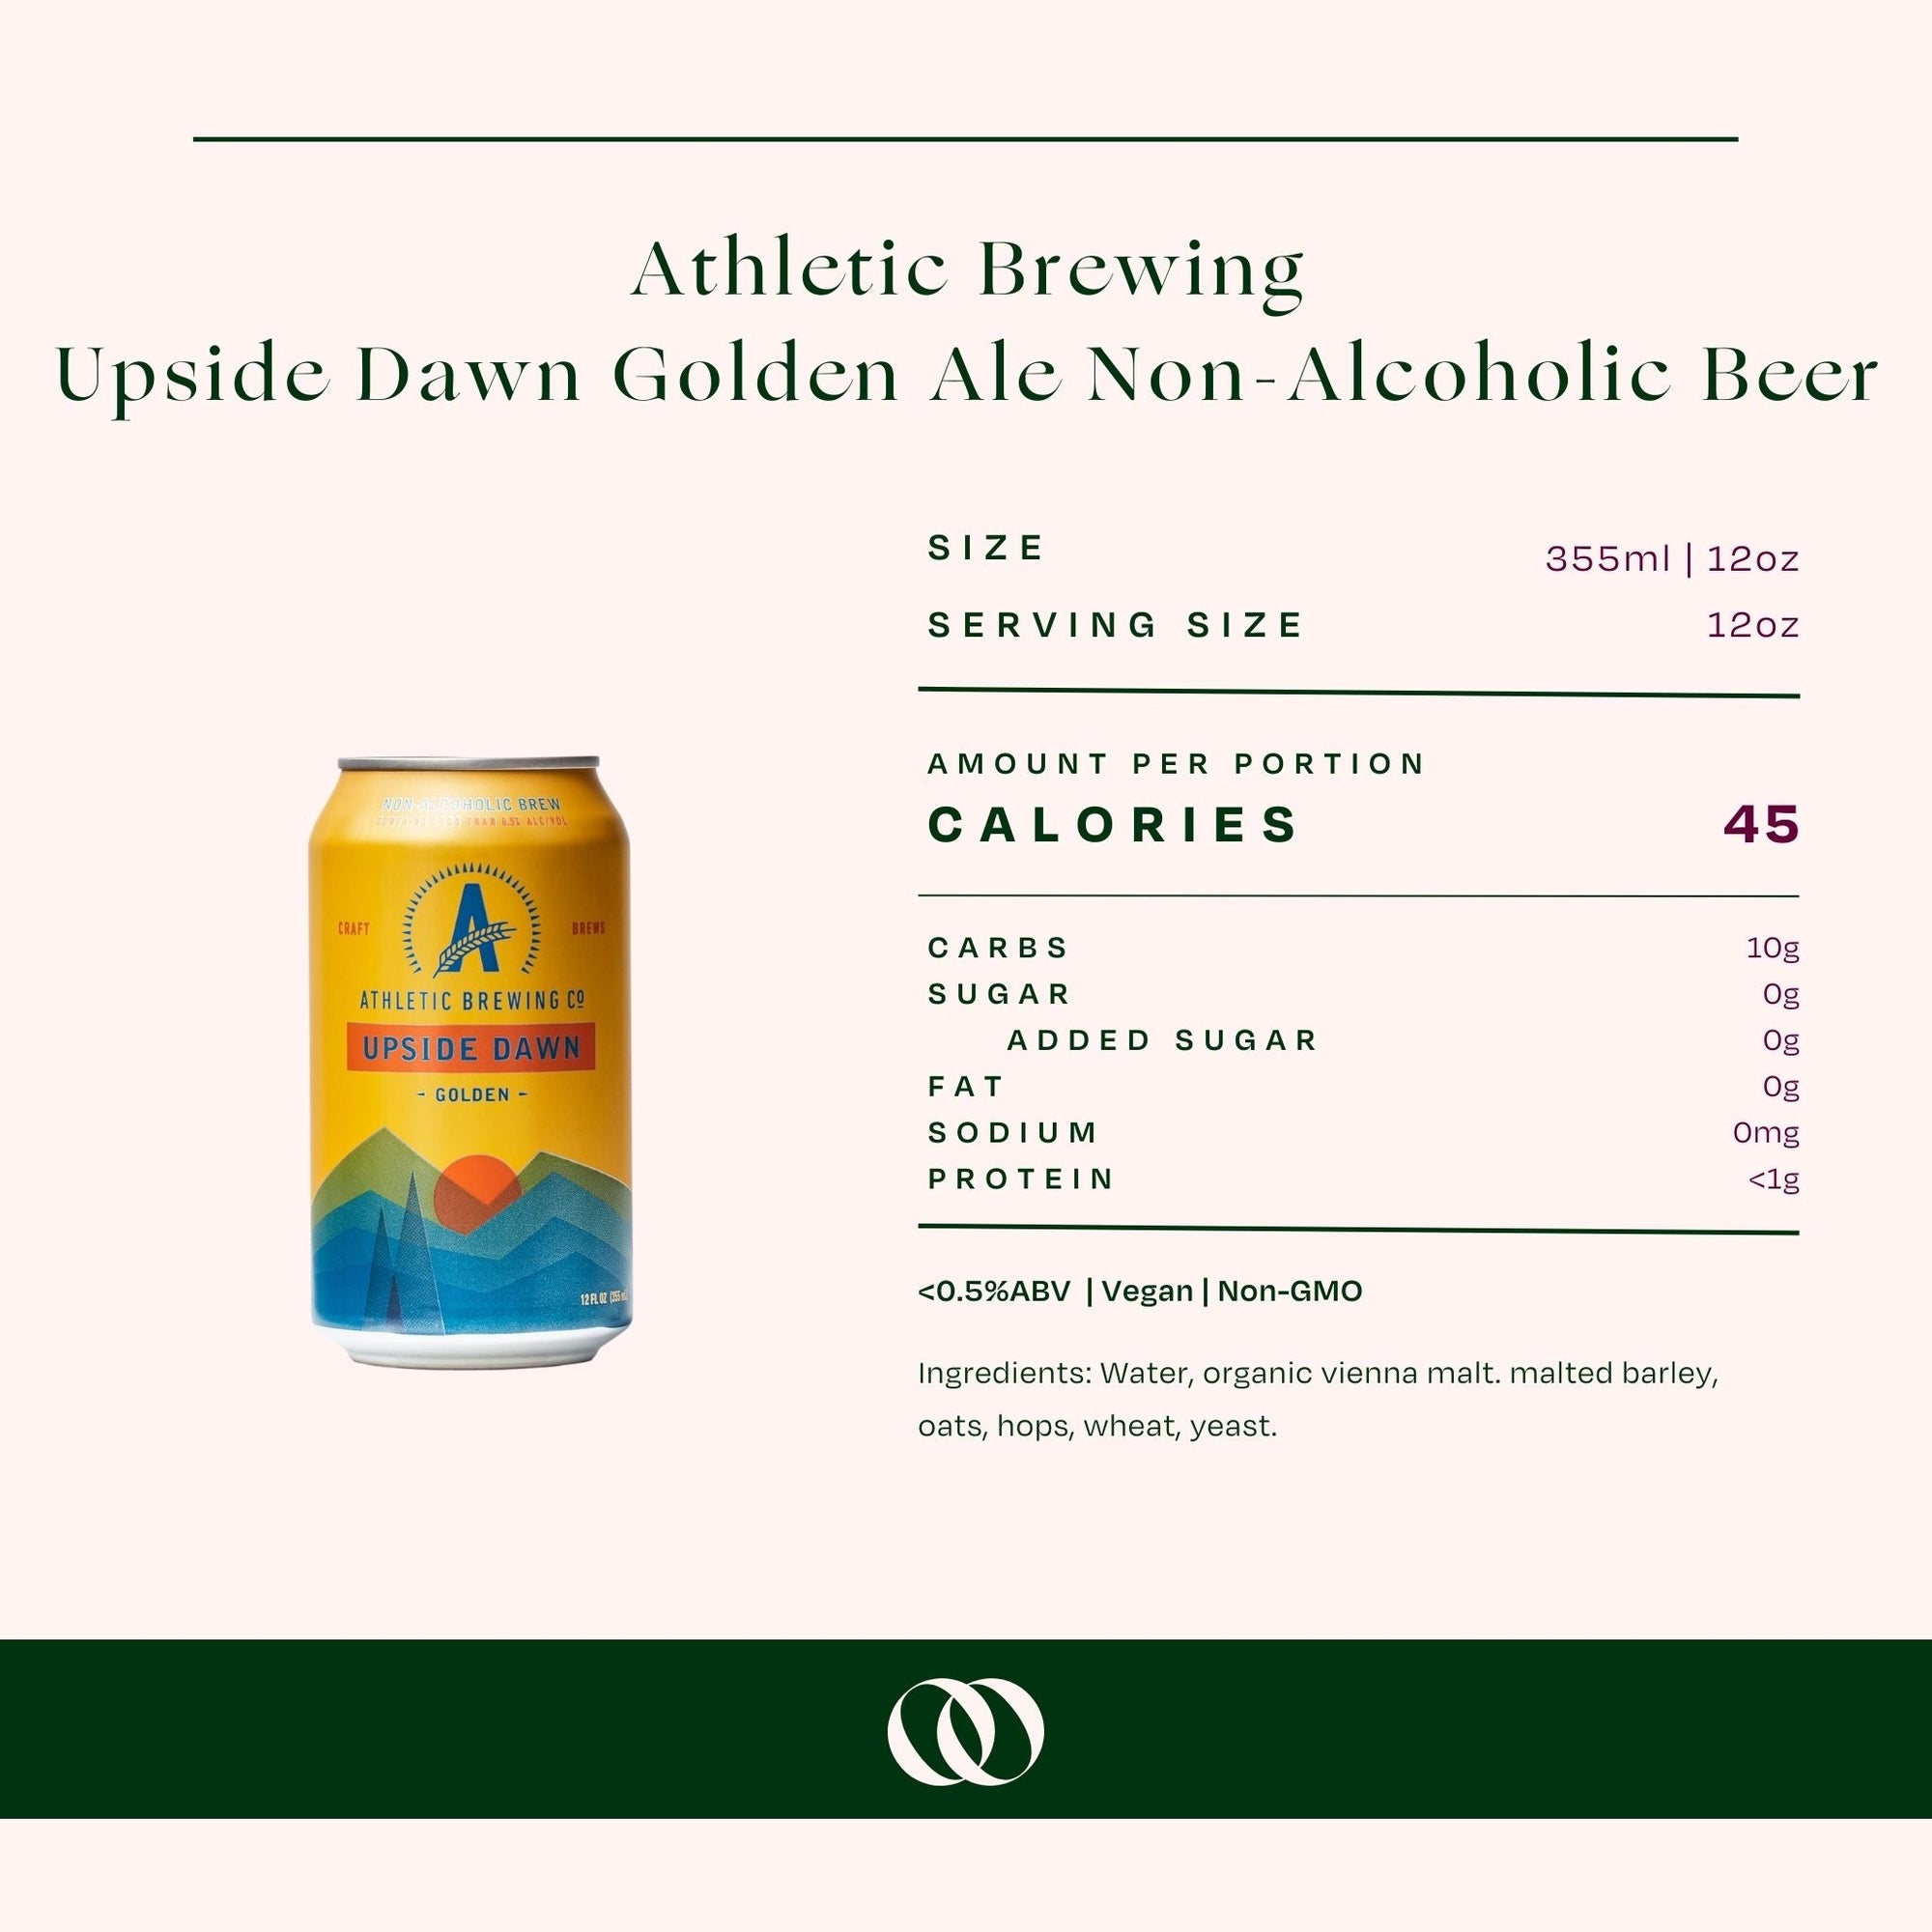 Athletic Brewing Company - Upside Dawn Golden - Non-Alcoholic Beer - 6 Pack - Boisson